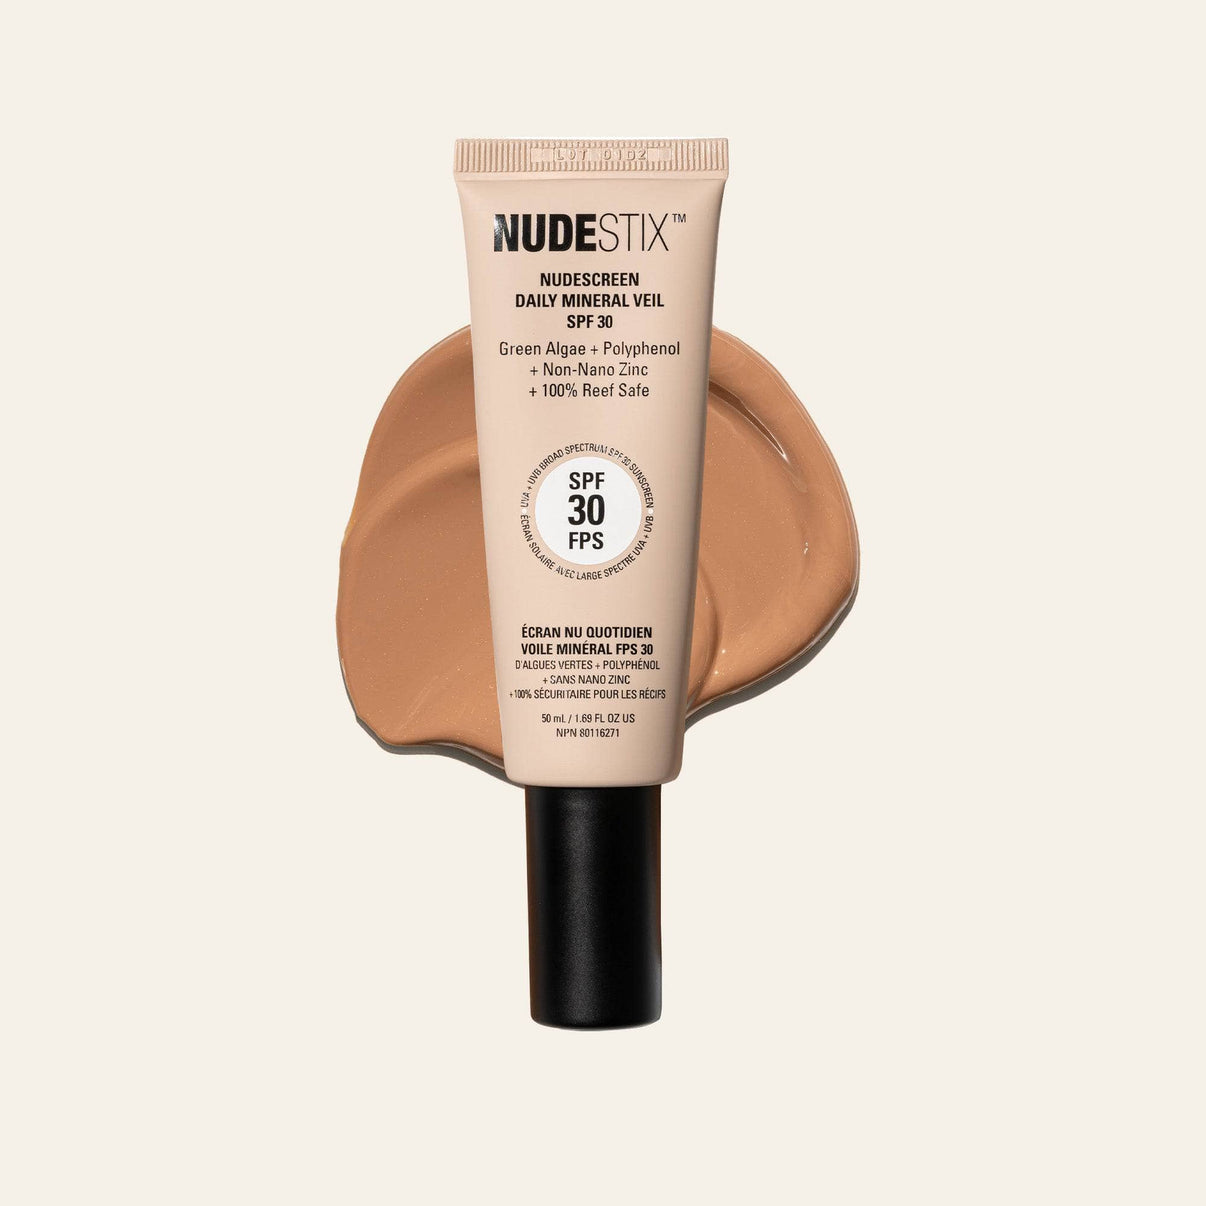 Nudescreen SPF Moisturizer in shade Tan with texture swatches